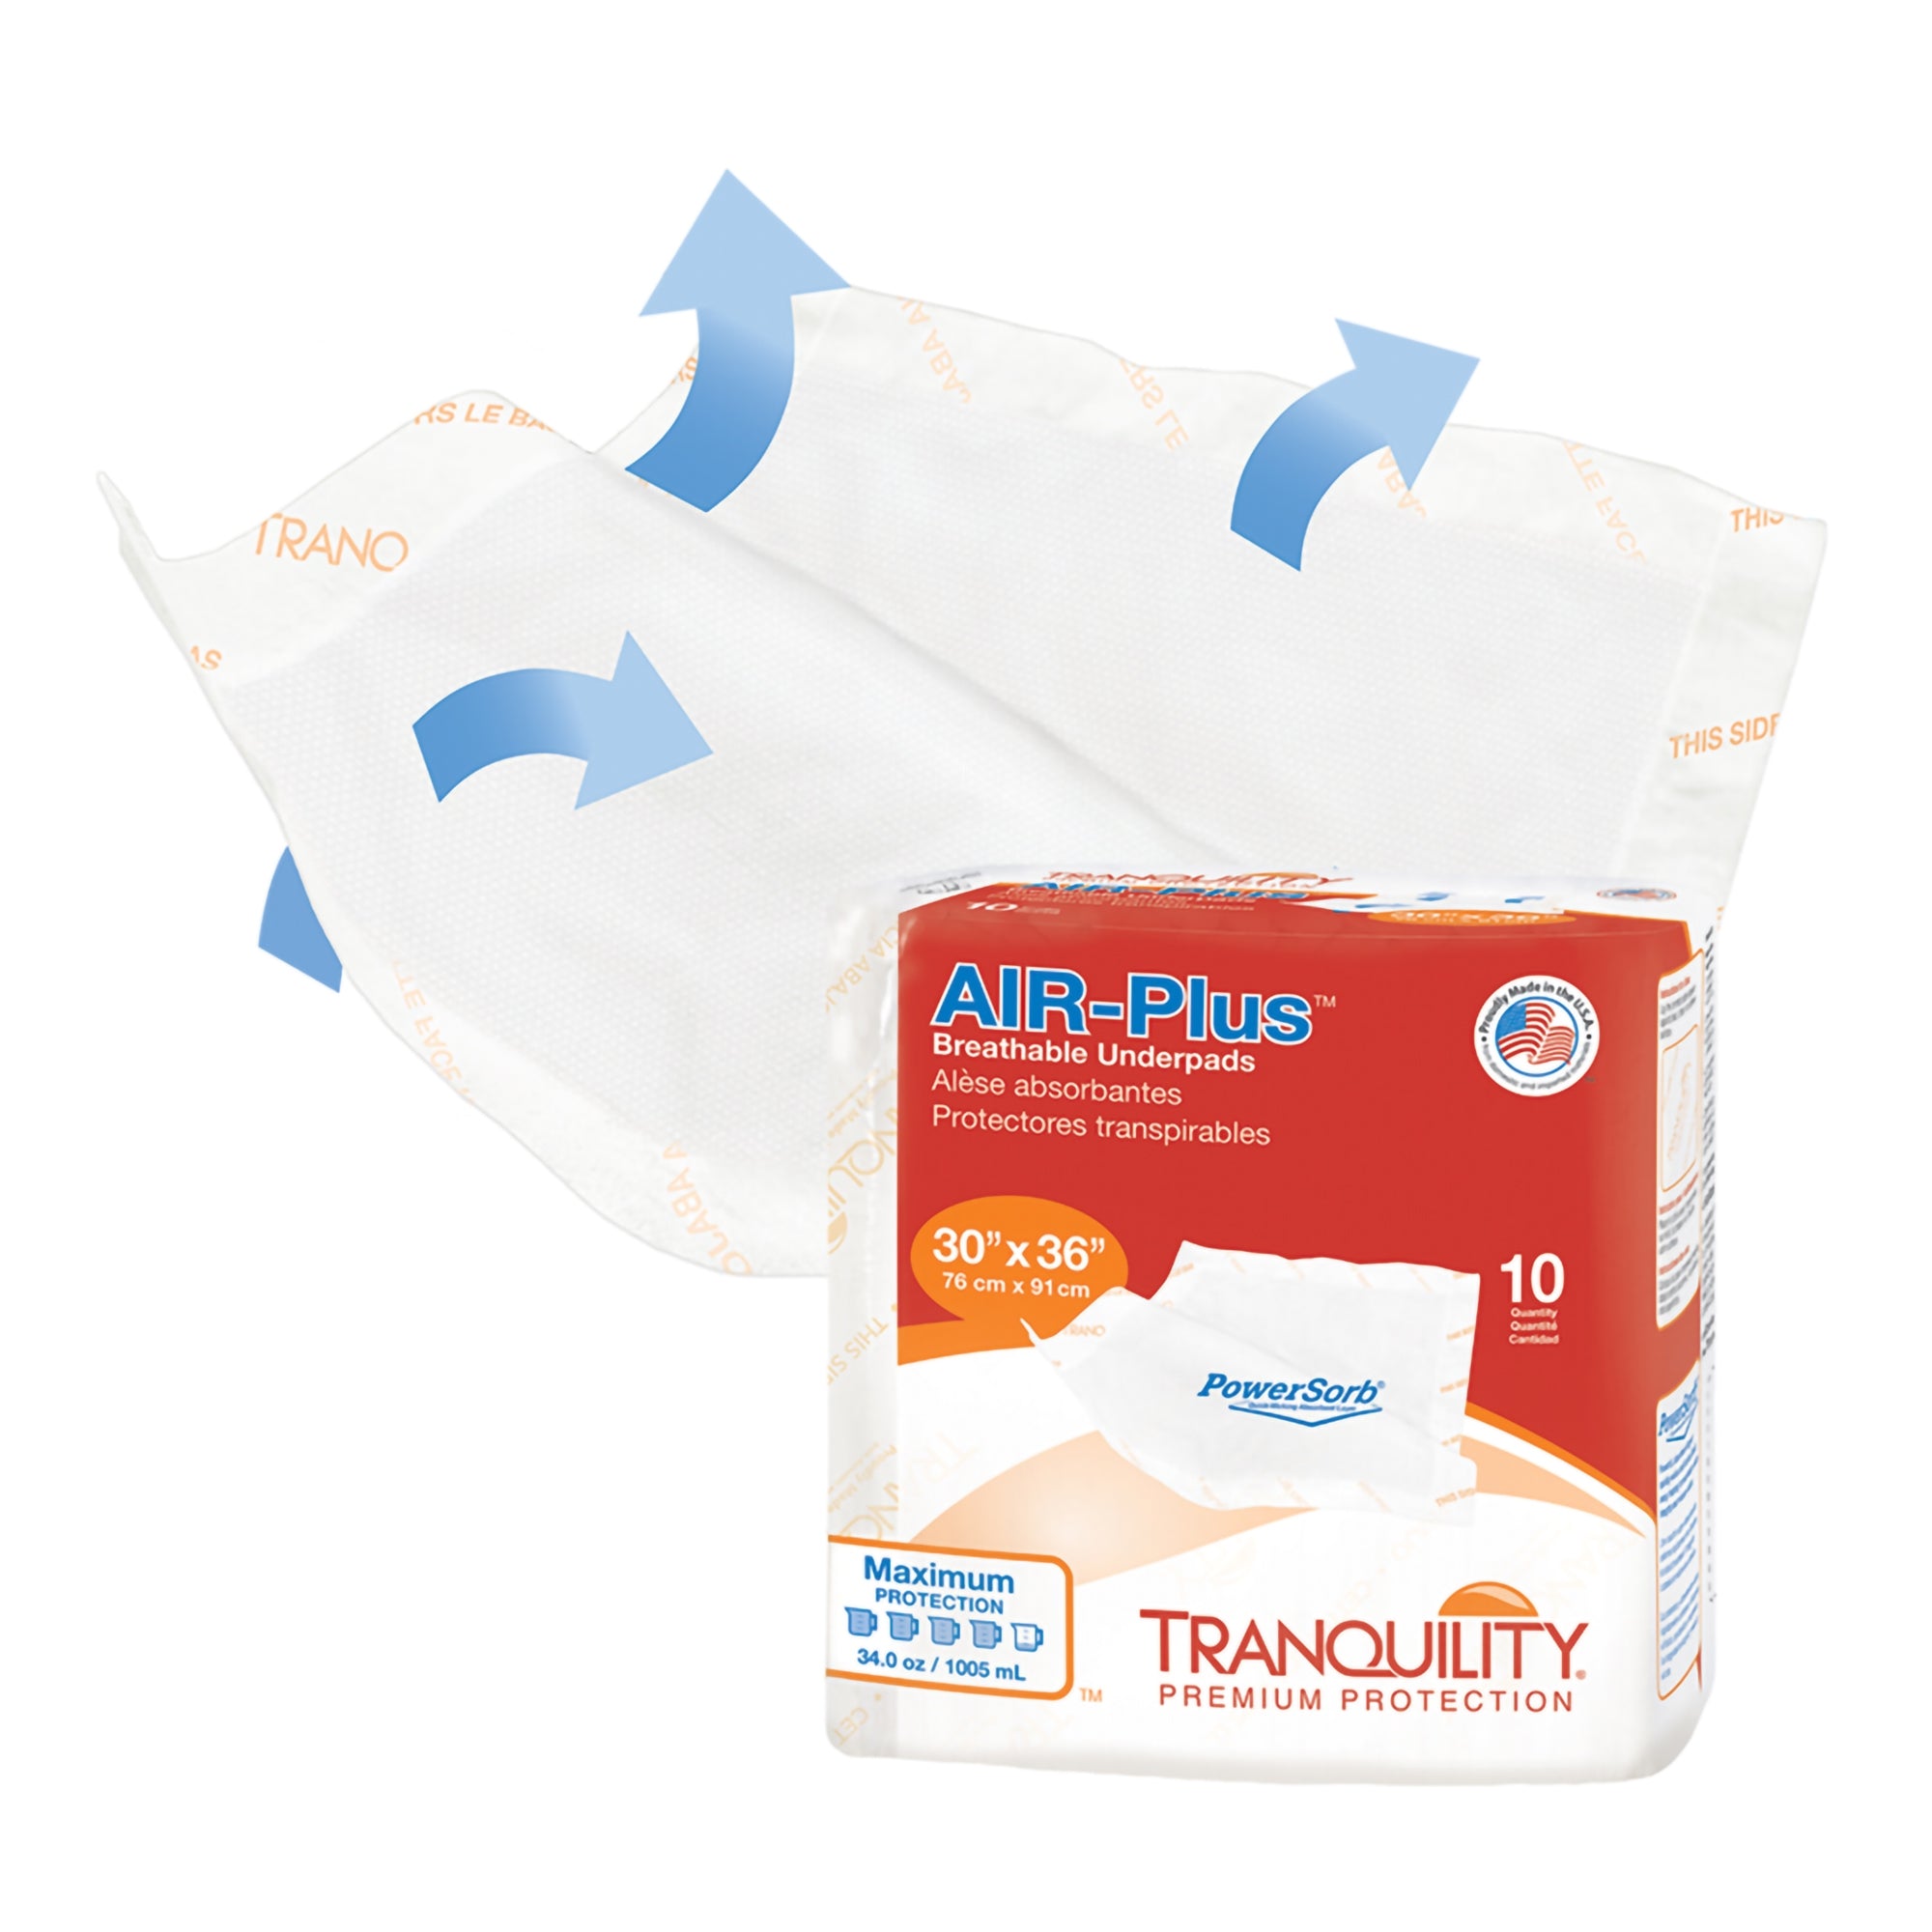 Tranquility® AIR-Plus™ High Absorbency Underpad 30x36" - 10 Pack